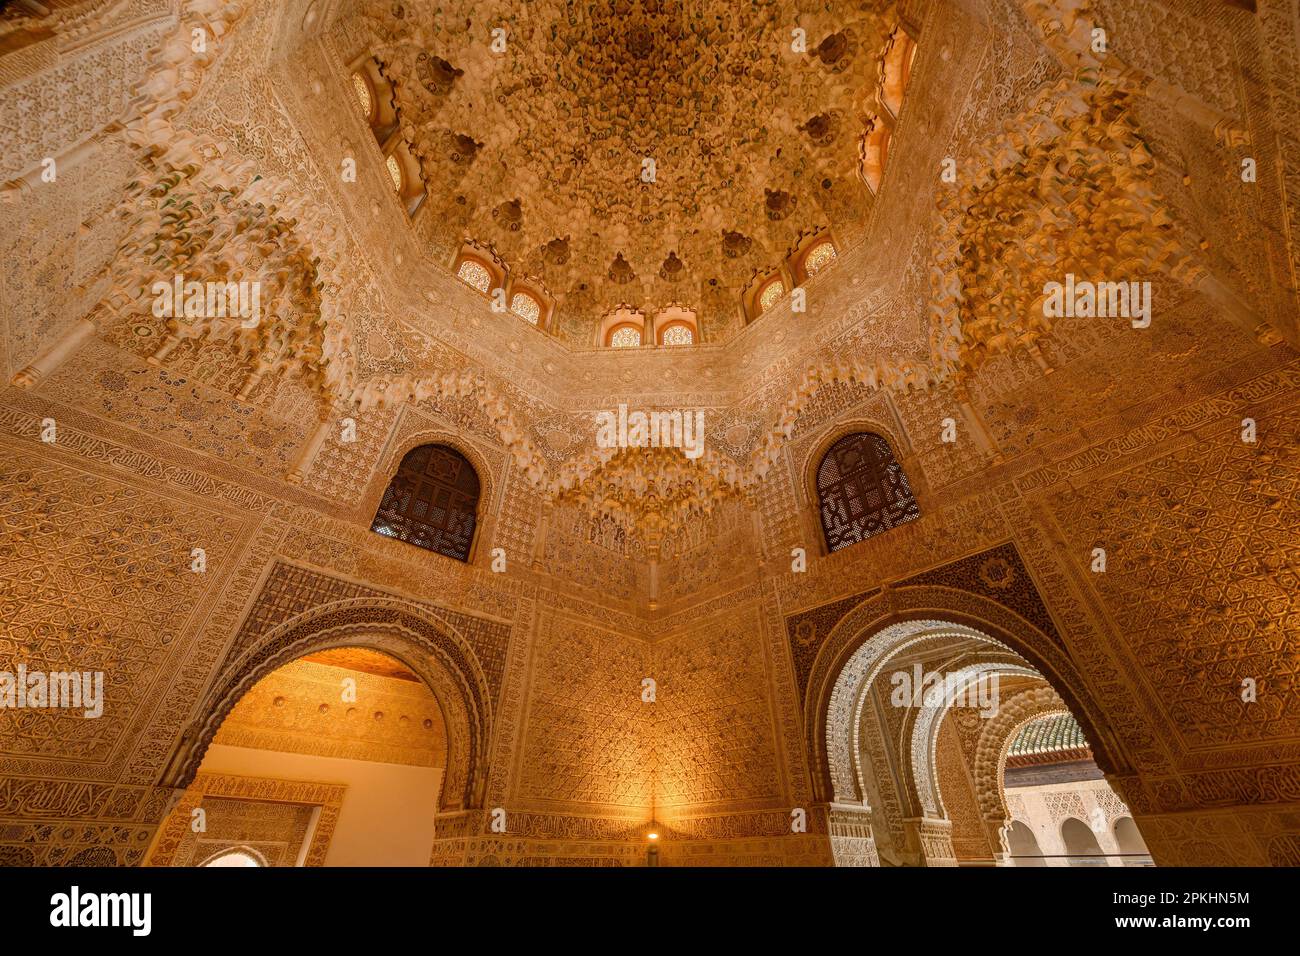 Muqarnas in dome and ceiling of Hall of the Abencerrajes in Nasrid Palace. Breathtaking layers of textures tessellating shapes, forms. Stock Photo